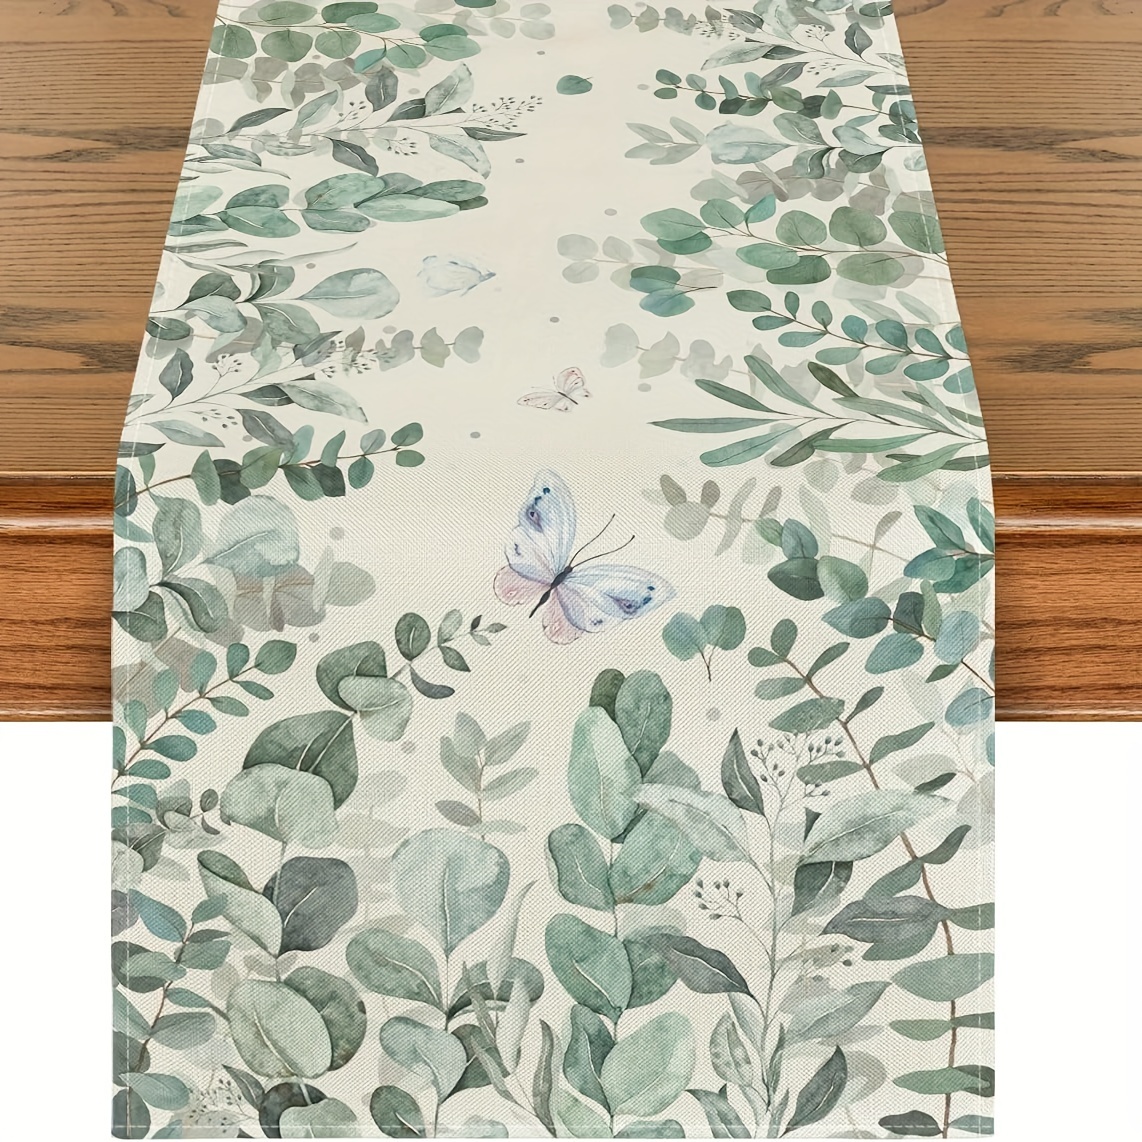 

1pc, Table Runner, Green Plant Printed Table Runner, Spring Theme Dustproof & Wipe Clean Table Runner, Perfect For Home Party Decor, Dining Table Decoration, Aesthetic Room Decor